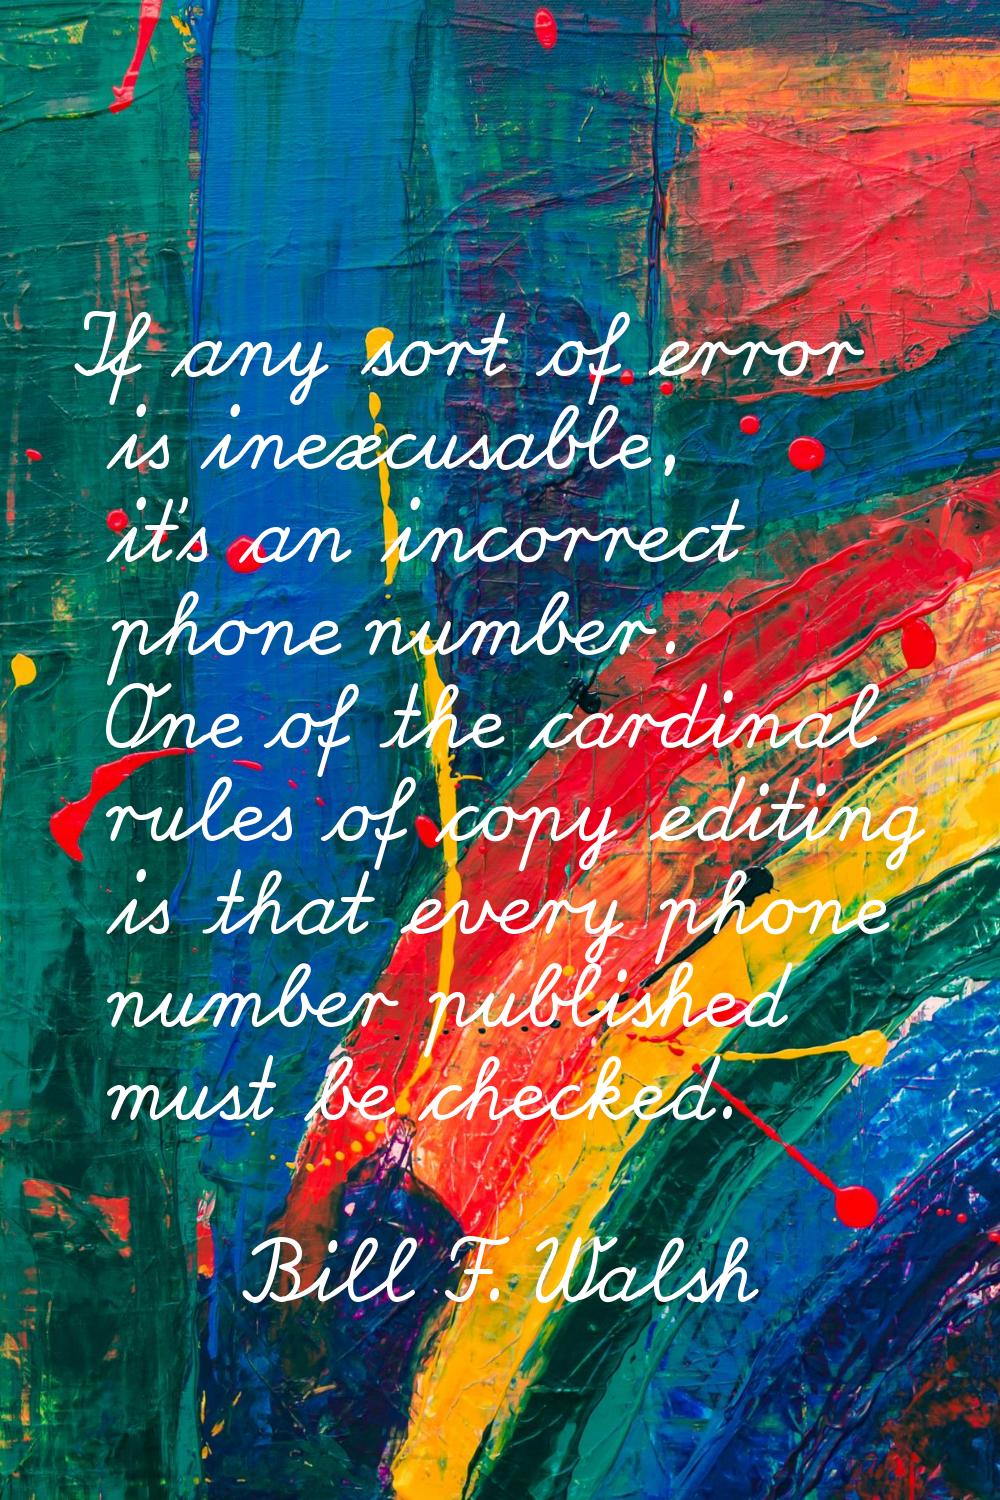 If any sort of error is inexcusable, it's an incorrect phone number. One of the cardinal rules of c